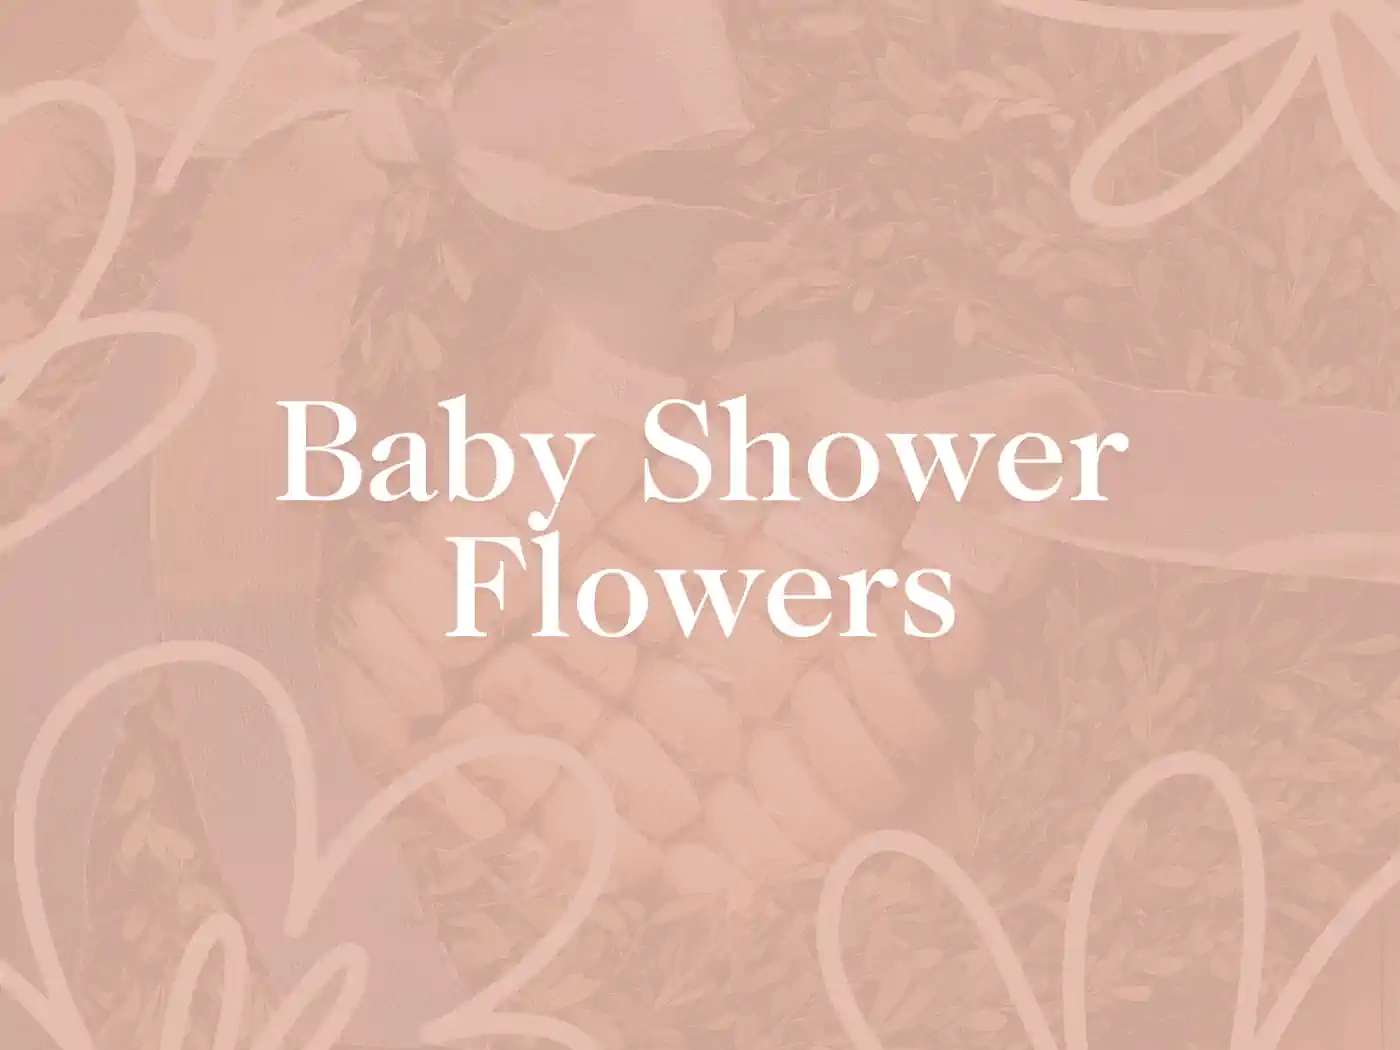 Image showing an assortment of baby shower flowers with a soft pink background, highlighting the theme and elegance of the event. Fabulous Flowers and Gifts: Baby Shower Flowers Collection